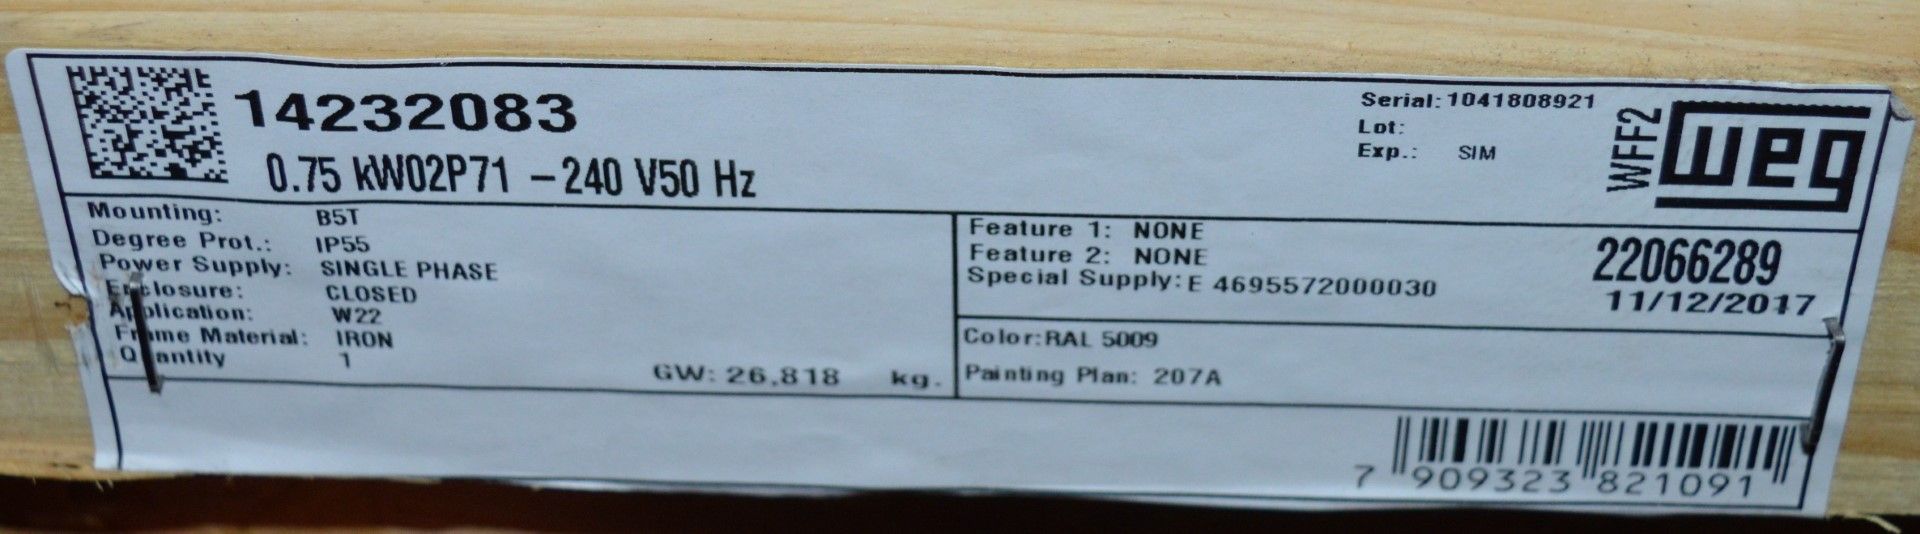 1 x Weg W22 240v IP55 Single Phase Electric Motor - New and Boxed - CL295 - Location: Altrincham - Image 4 of 8